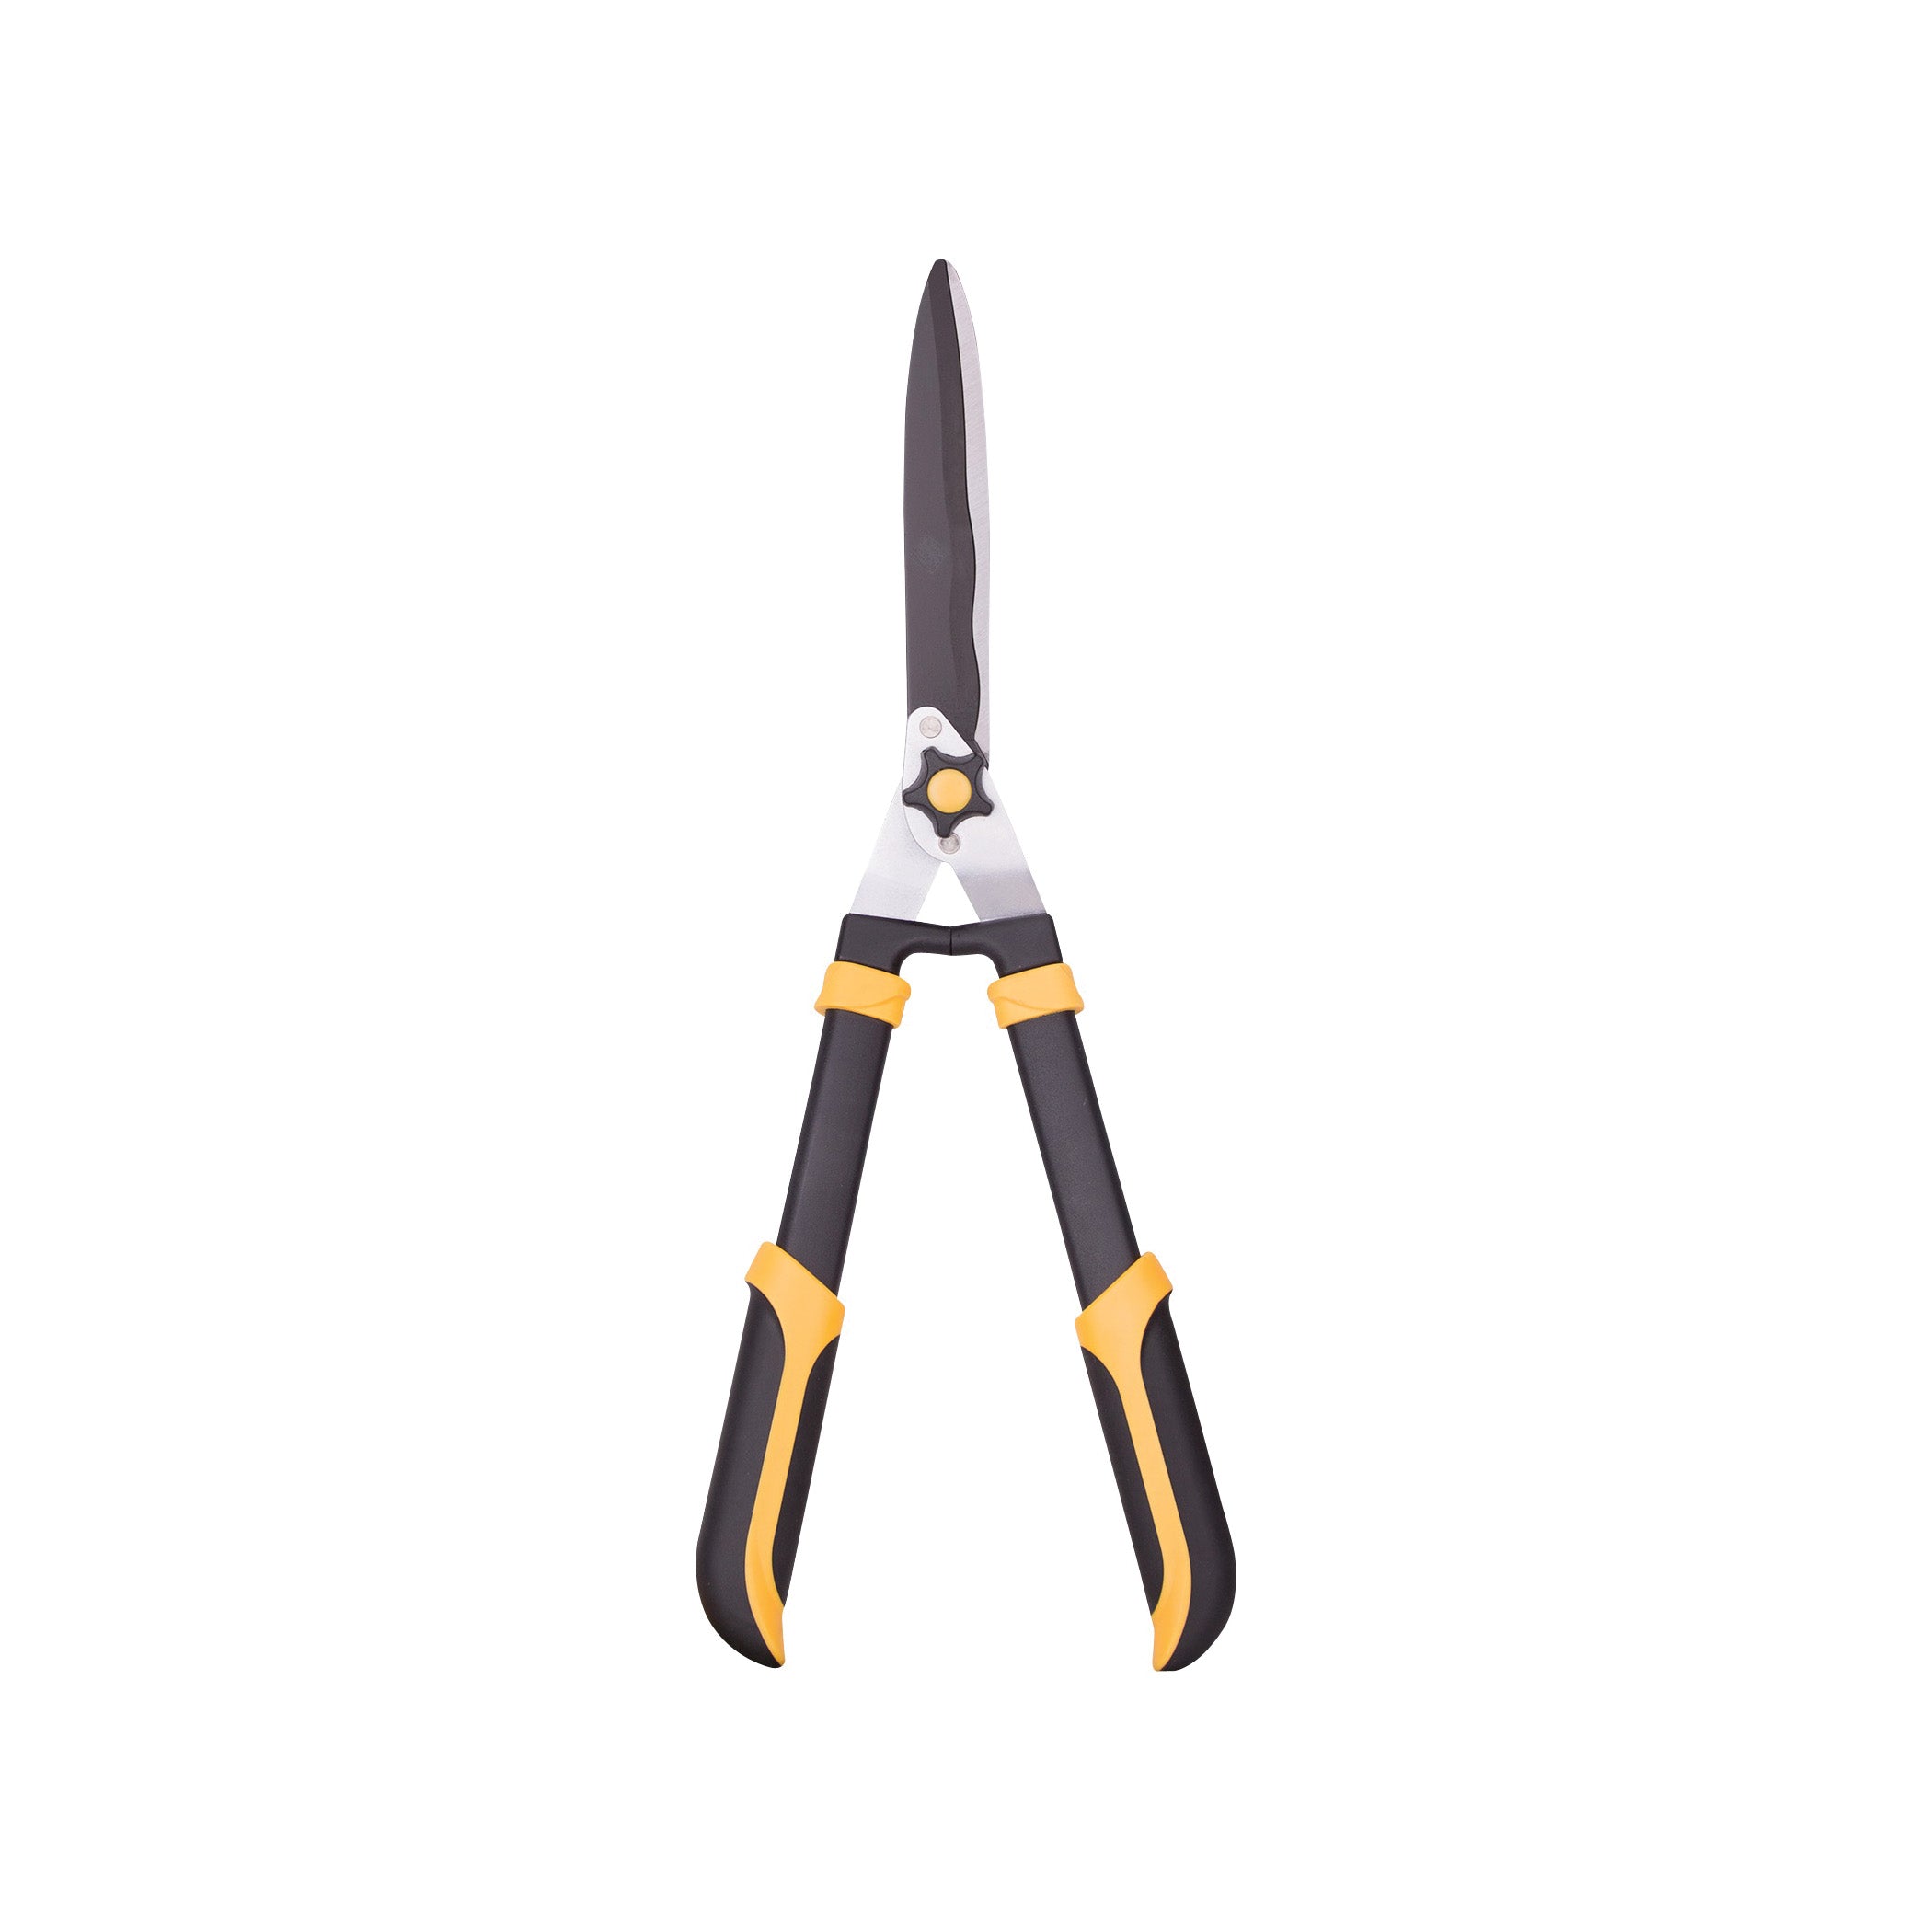 Landscapers Select Deluxe Hedge Shears - 22"